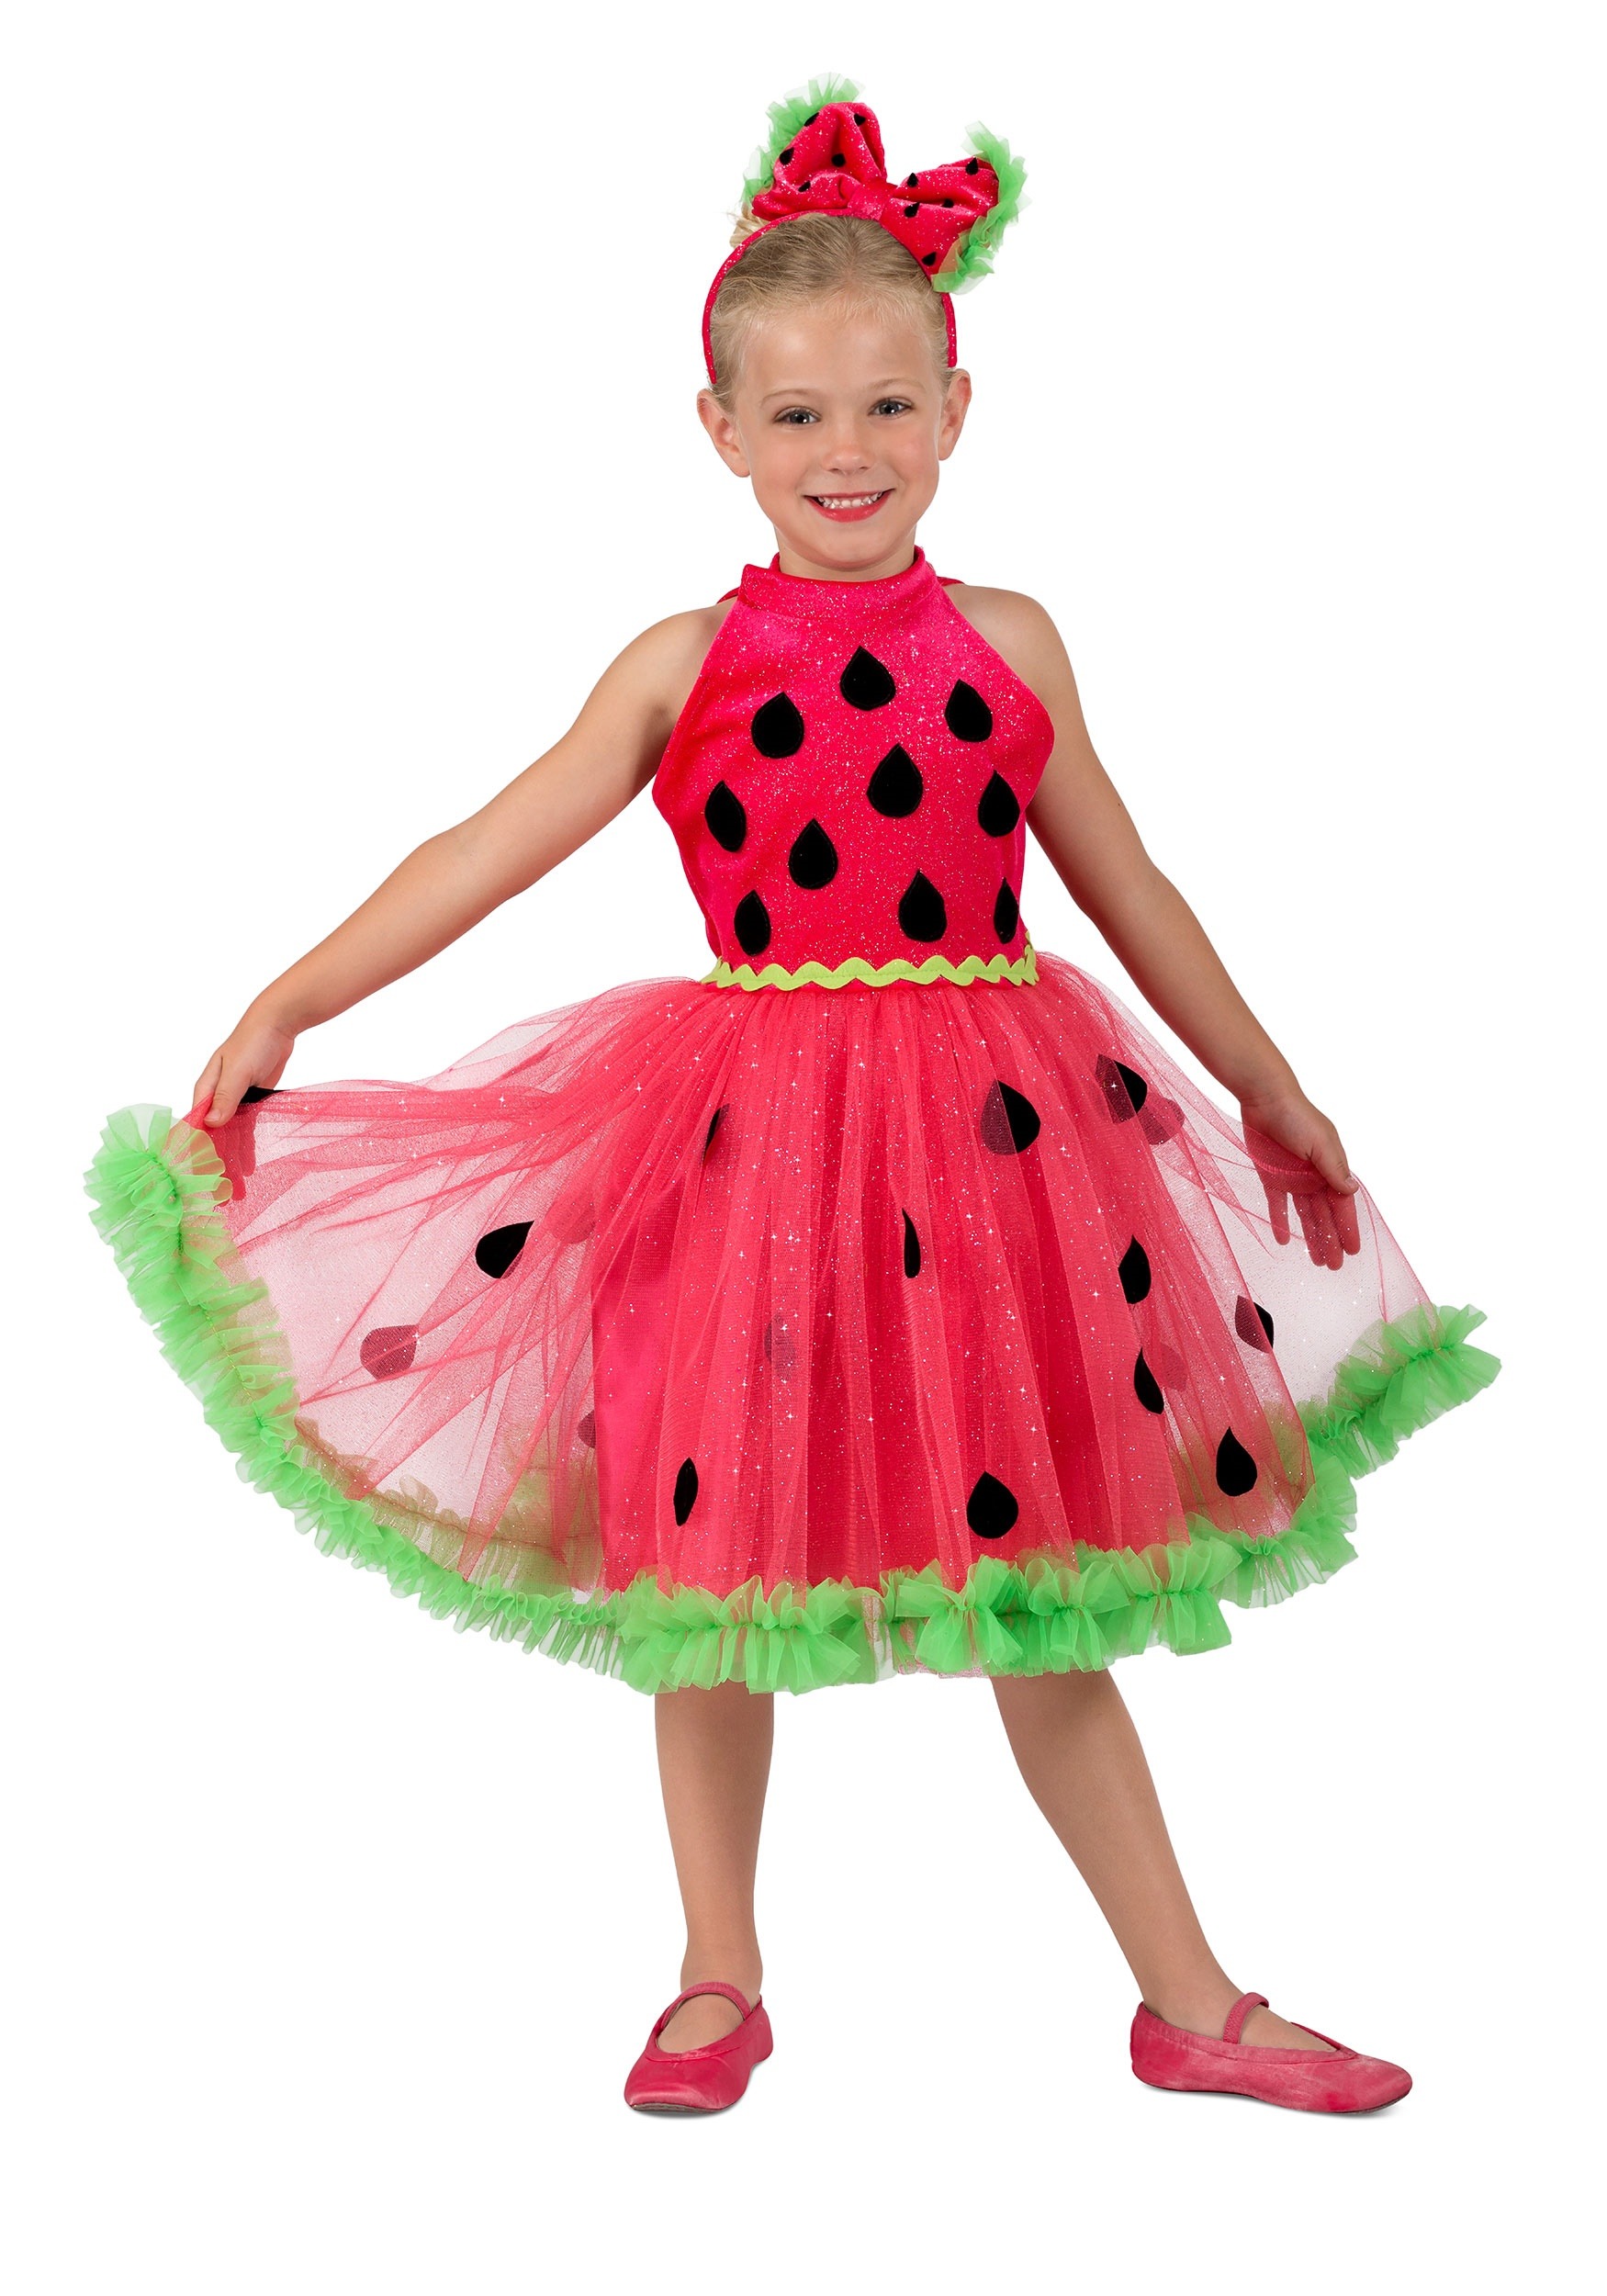 Watermelon Miss Costume for Girls. watermelon outfit girl. 